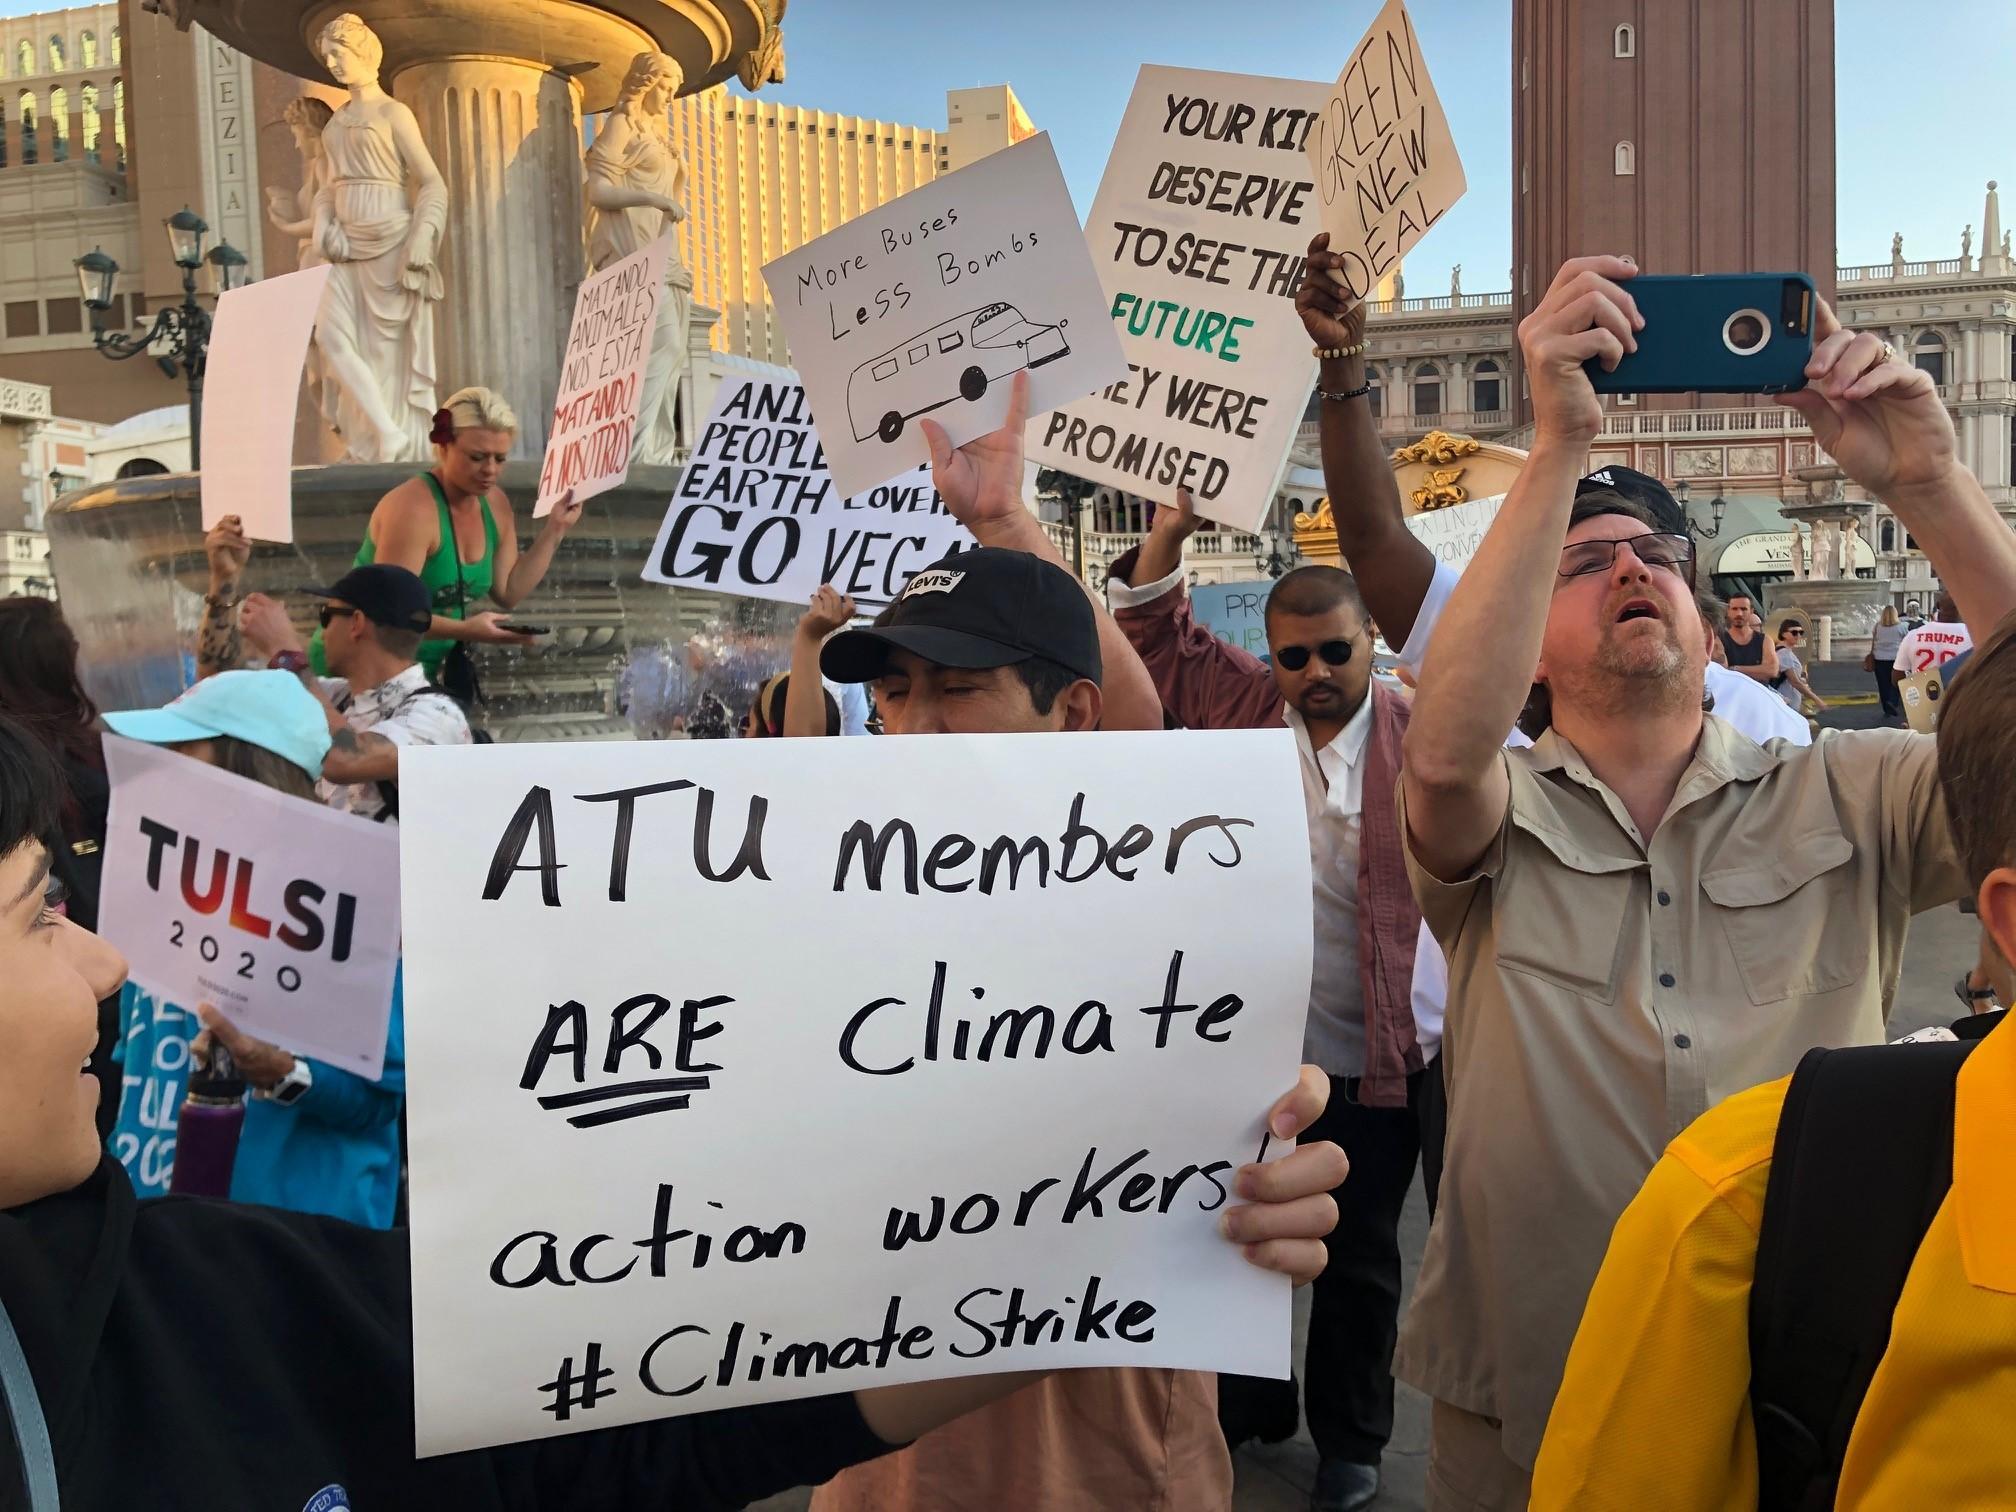 transit workers are climate action workers